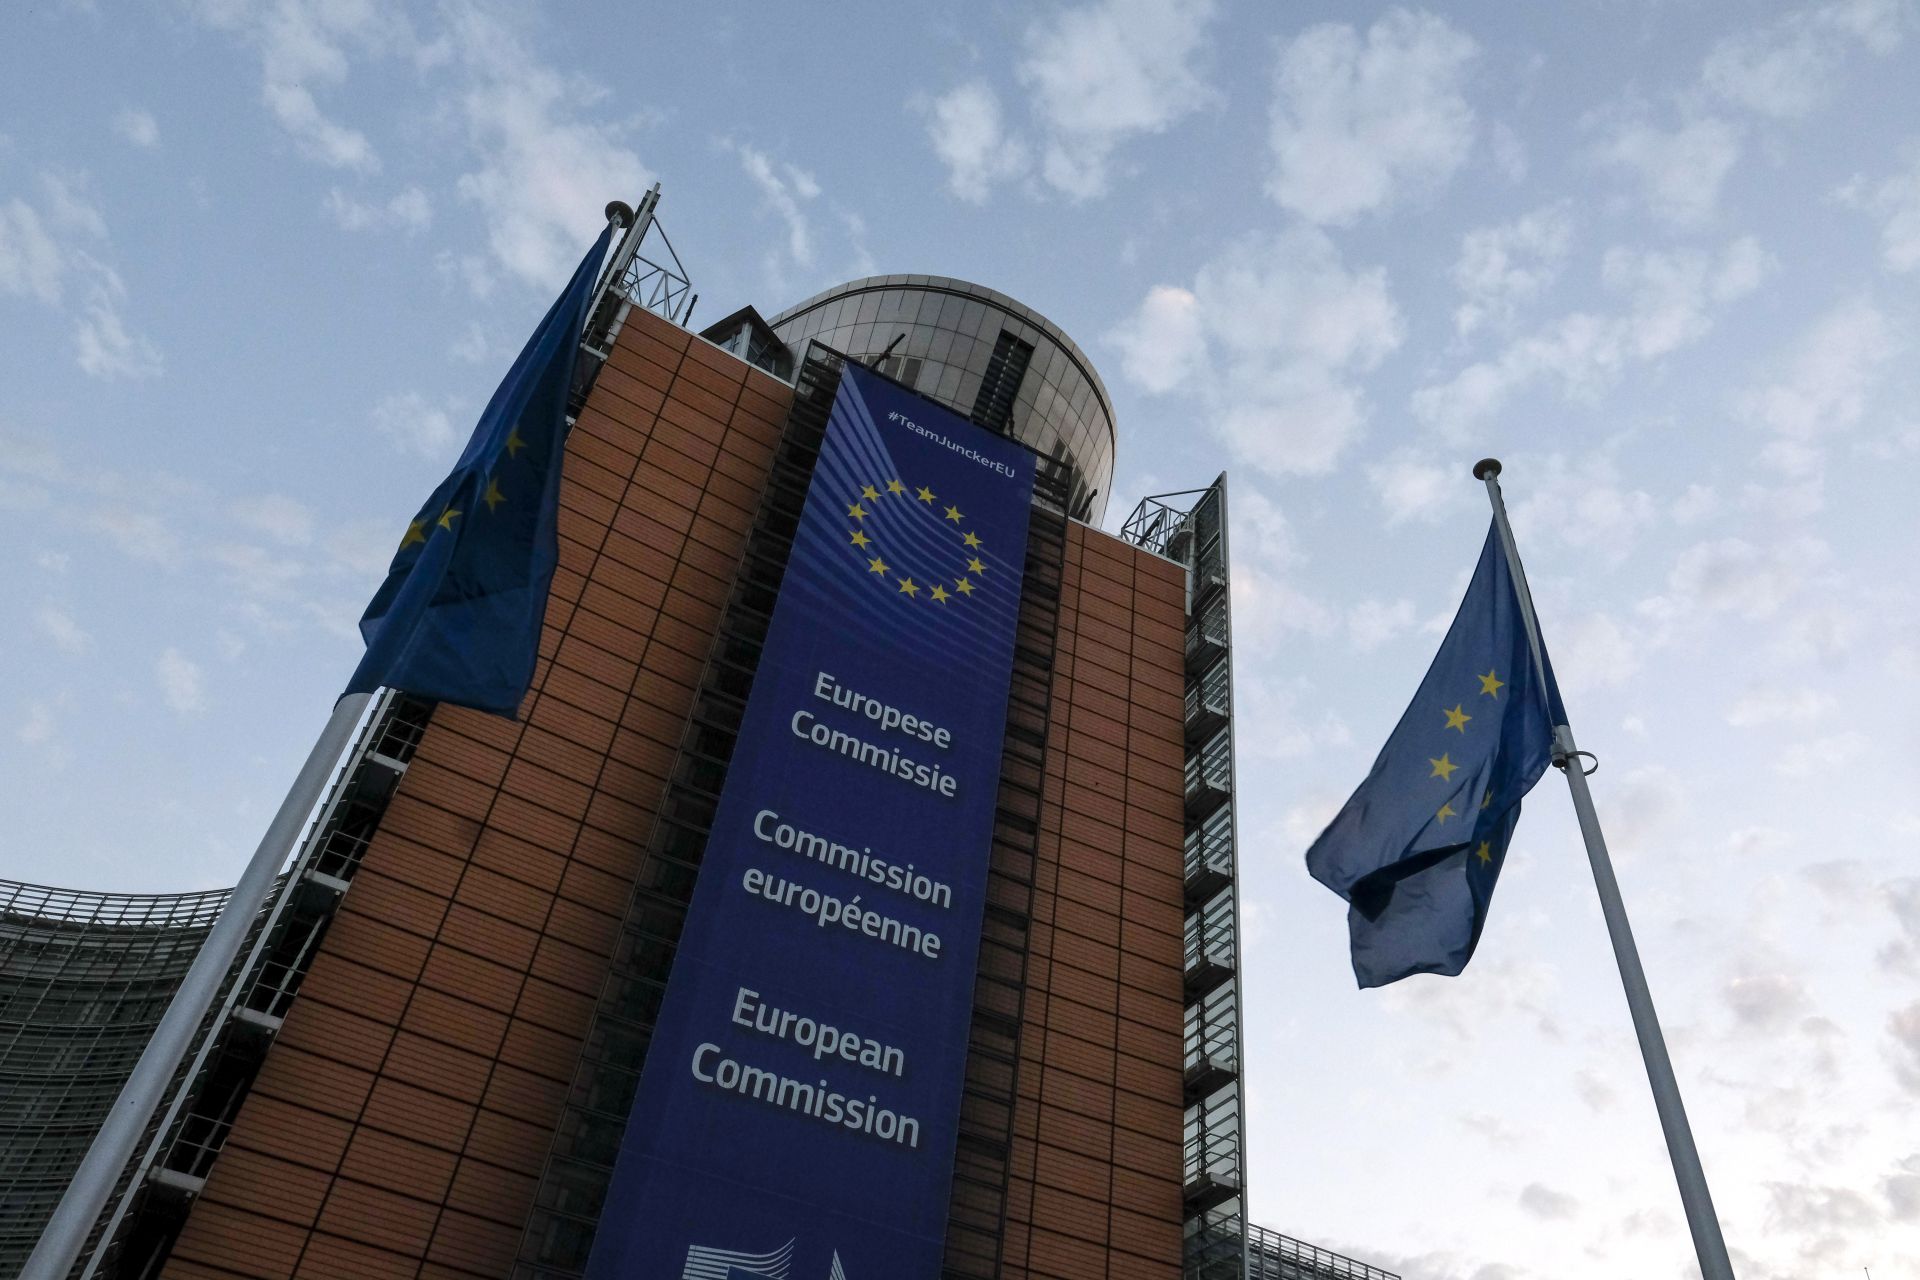 epa07686414 A view of the European Commission headquarters after a night of negotiations for European leaders during a Special European Council in Brussels, Belgium, 01 July 2019. Heads of states or governments from EU member states meet to continue discussions on the possible candidates for the heads of EU institutions, namely European Council President, President of the European Commission, High Representative of the Union for Foreign Affairs and Security Policy (Foreign Policy Chief), and President of the European Central Bank.  EPA/OLIVIER HOSLET